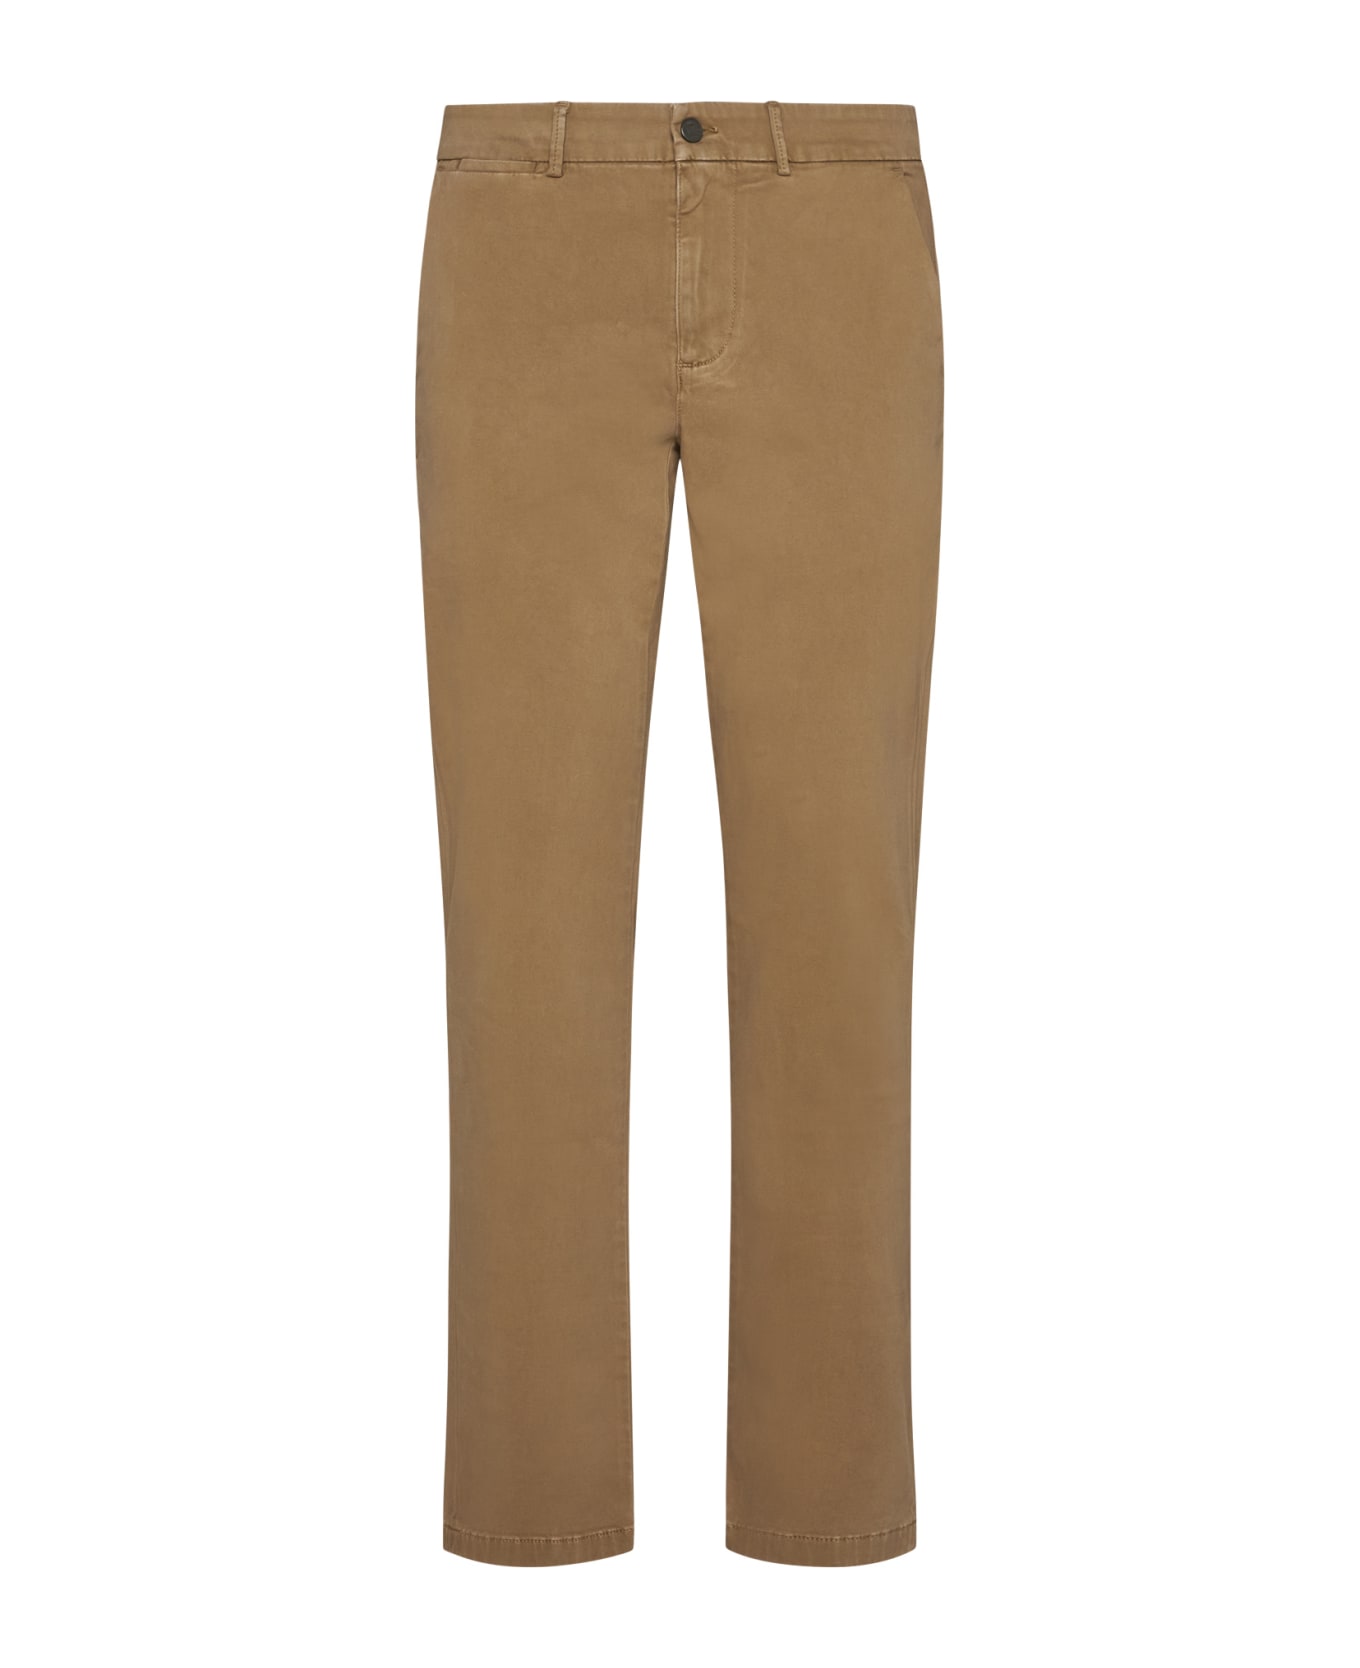 7 For All Mankind Jeans - Beige